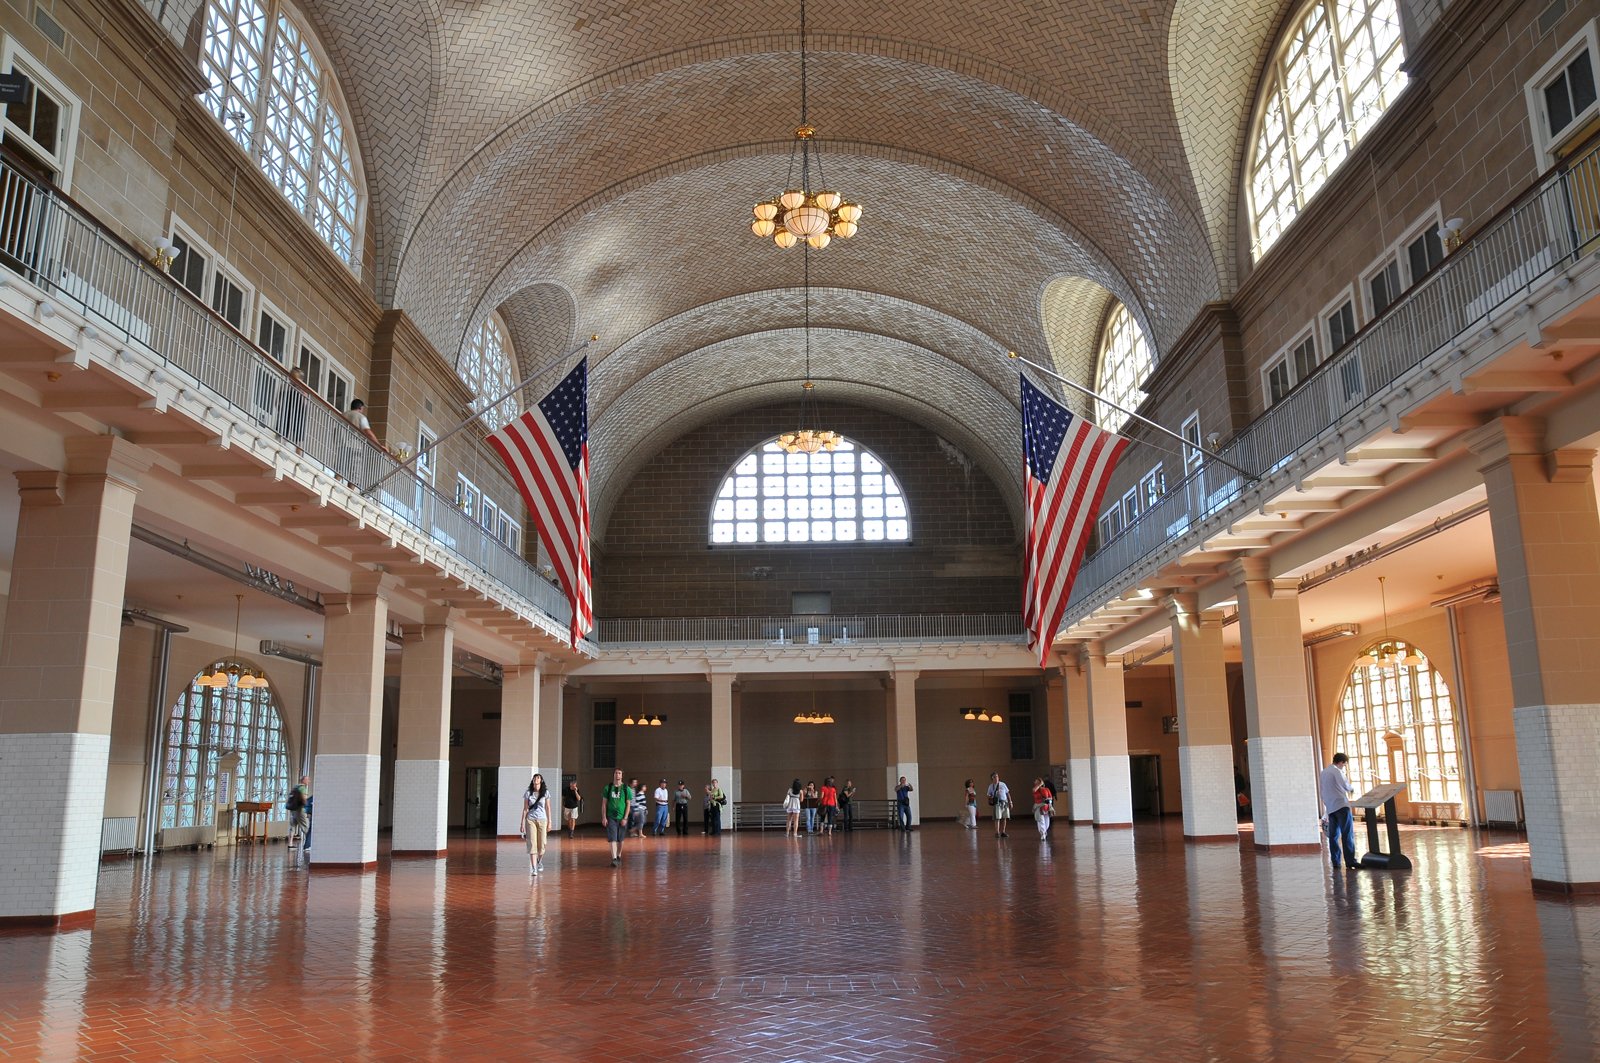 The august hall of Ellis Island Immigration Center